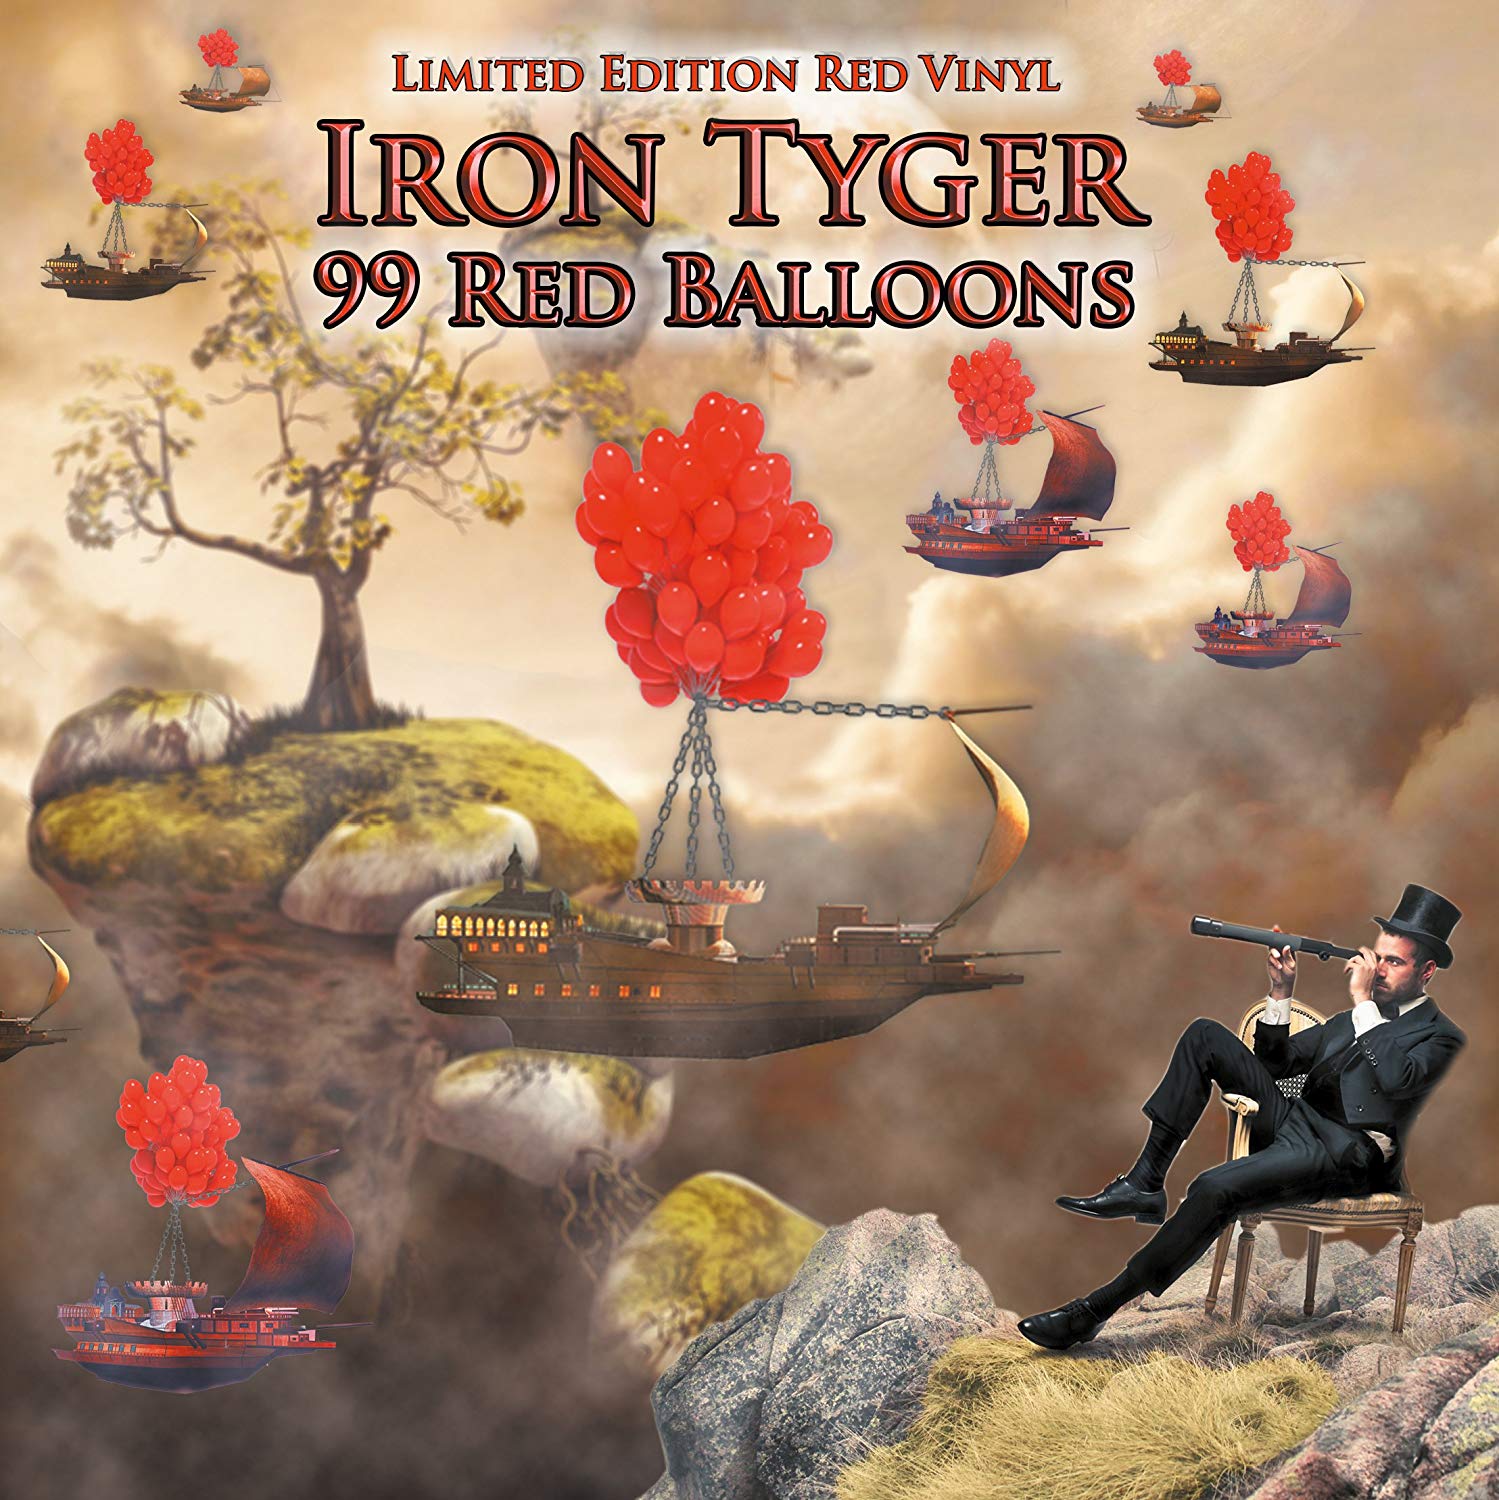 IRON TYGER - 99 RED BALLOONS/ACE OF SPADES: LIMITED EDITION RED VINYL 7" SINGLE - Coda Records